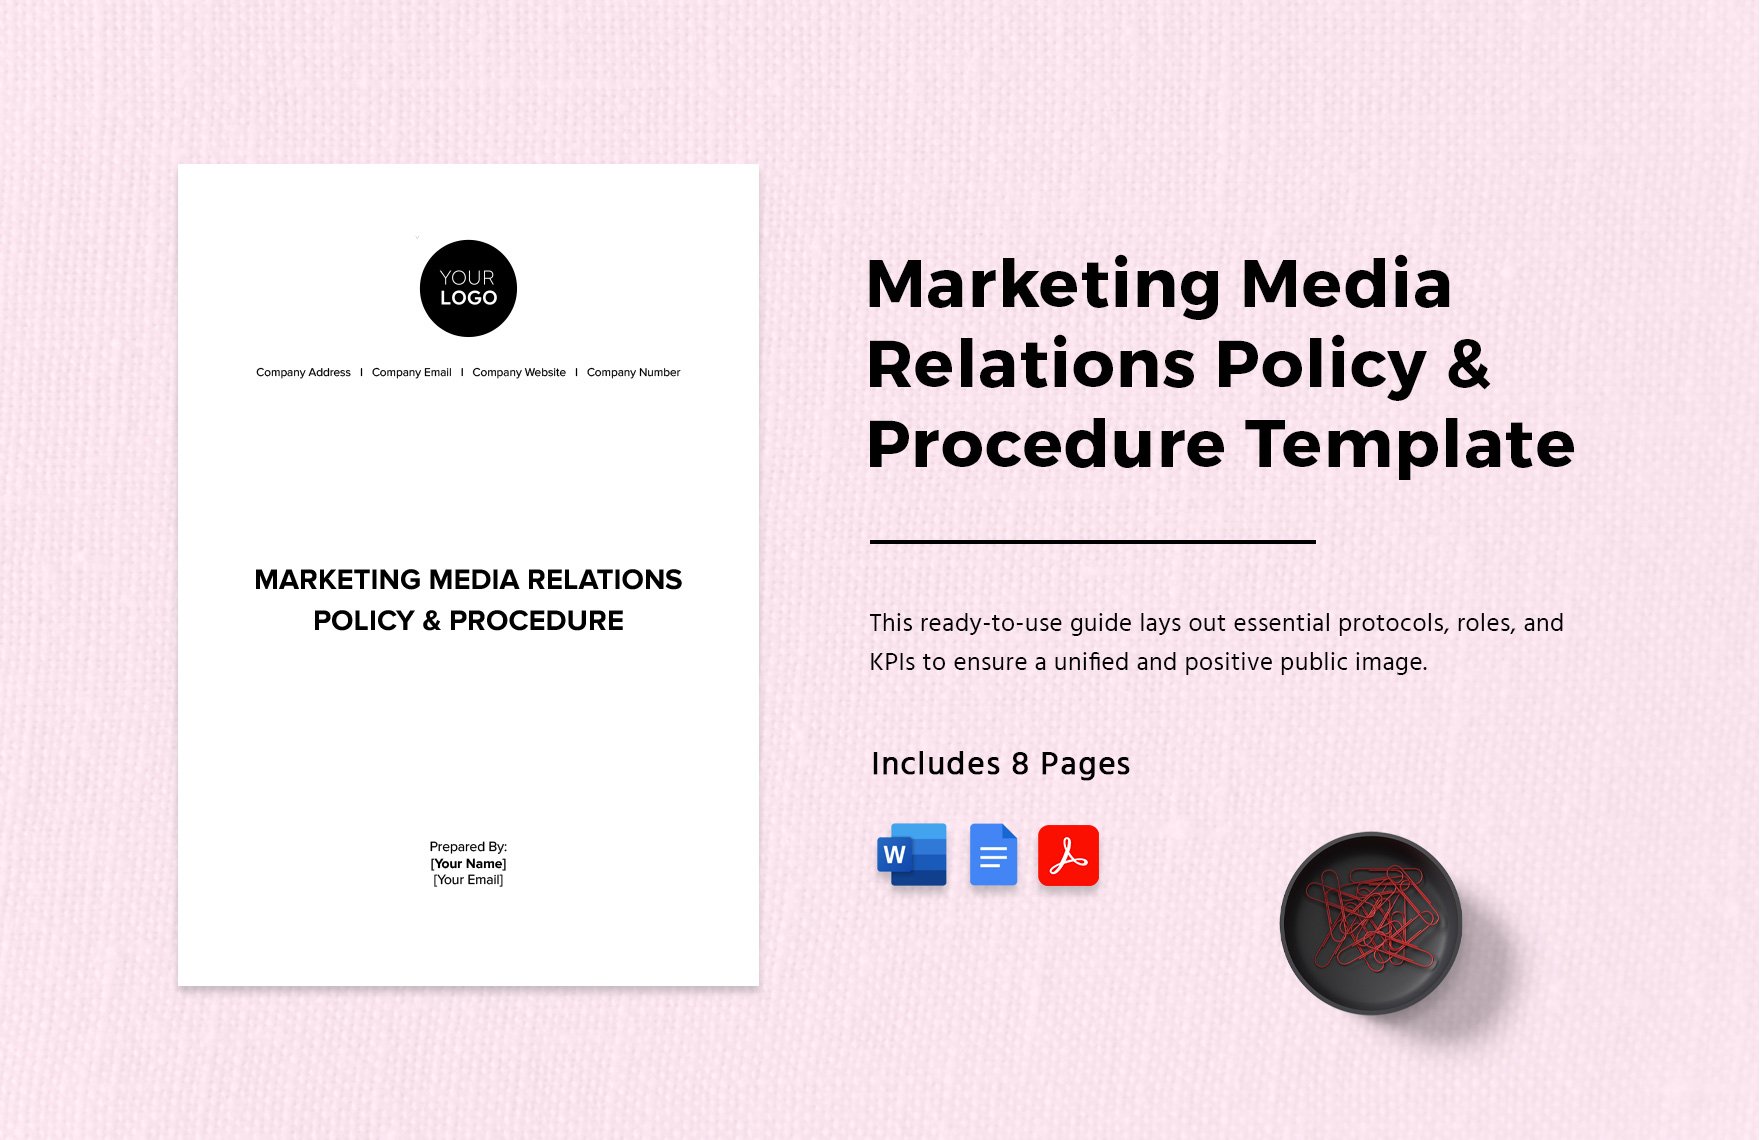 Marketing Media Relations Policy & Procedure Template in Word, Google Docs, PDF